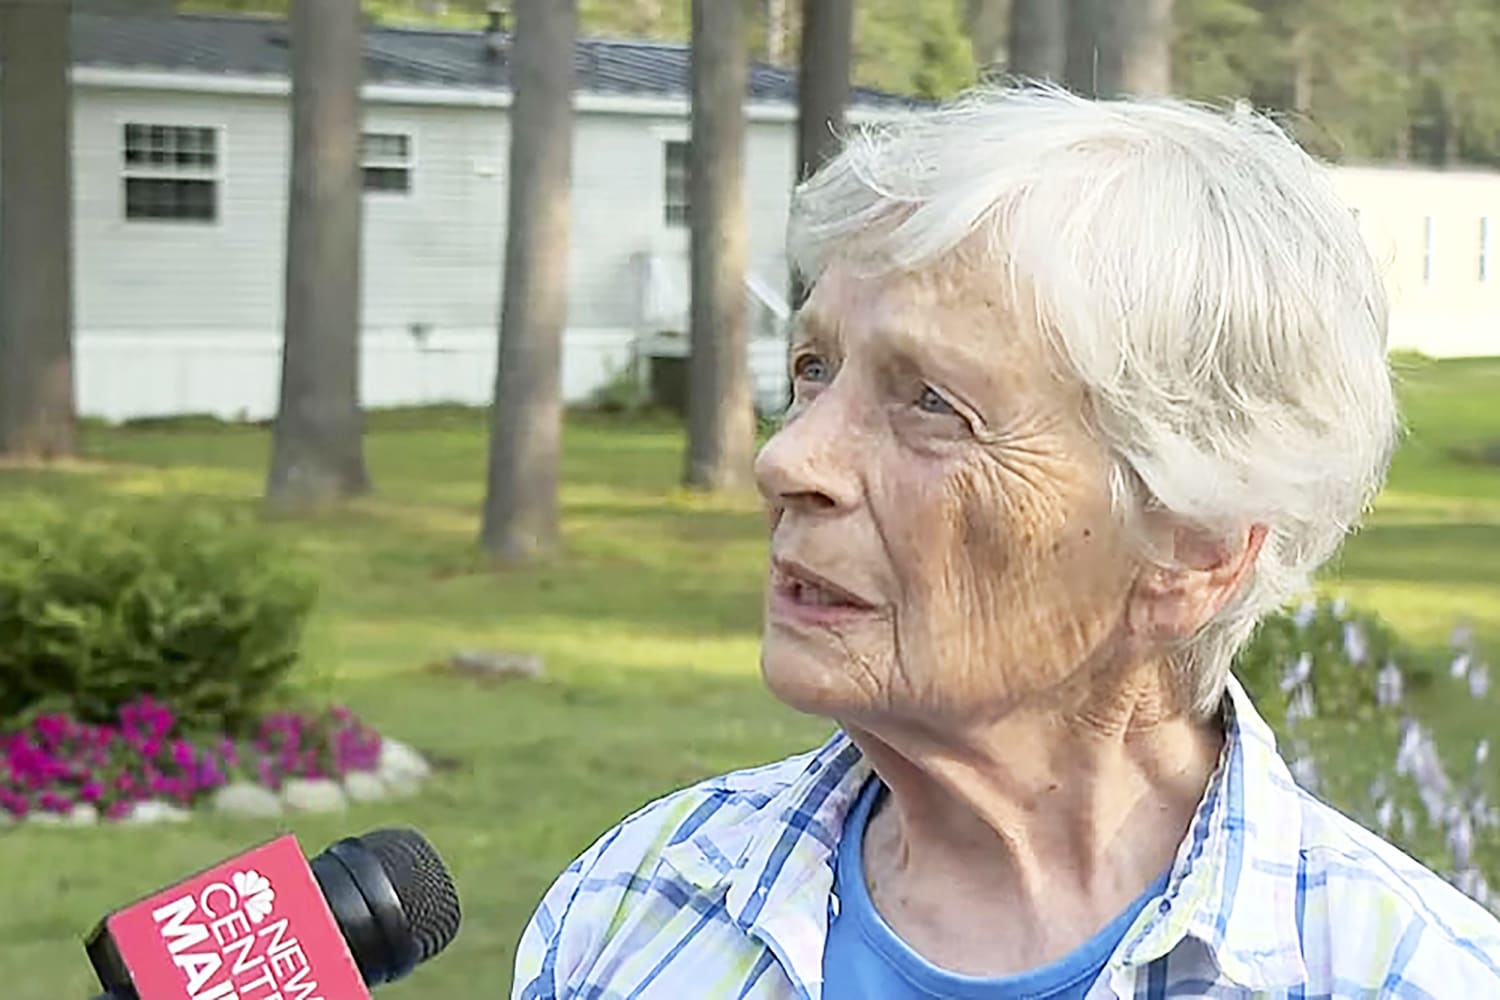 An 87-year-old woman fought off an intruder, then fed him after he told her he was hungry